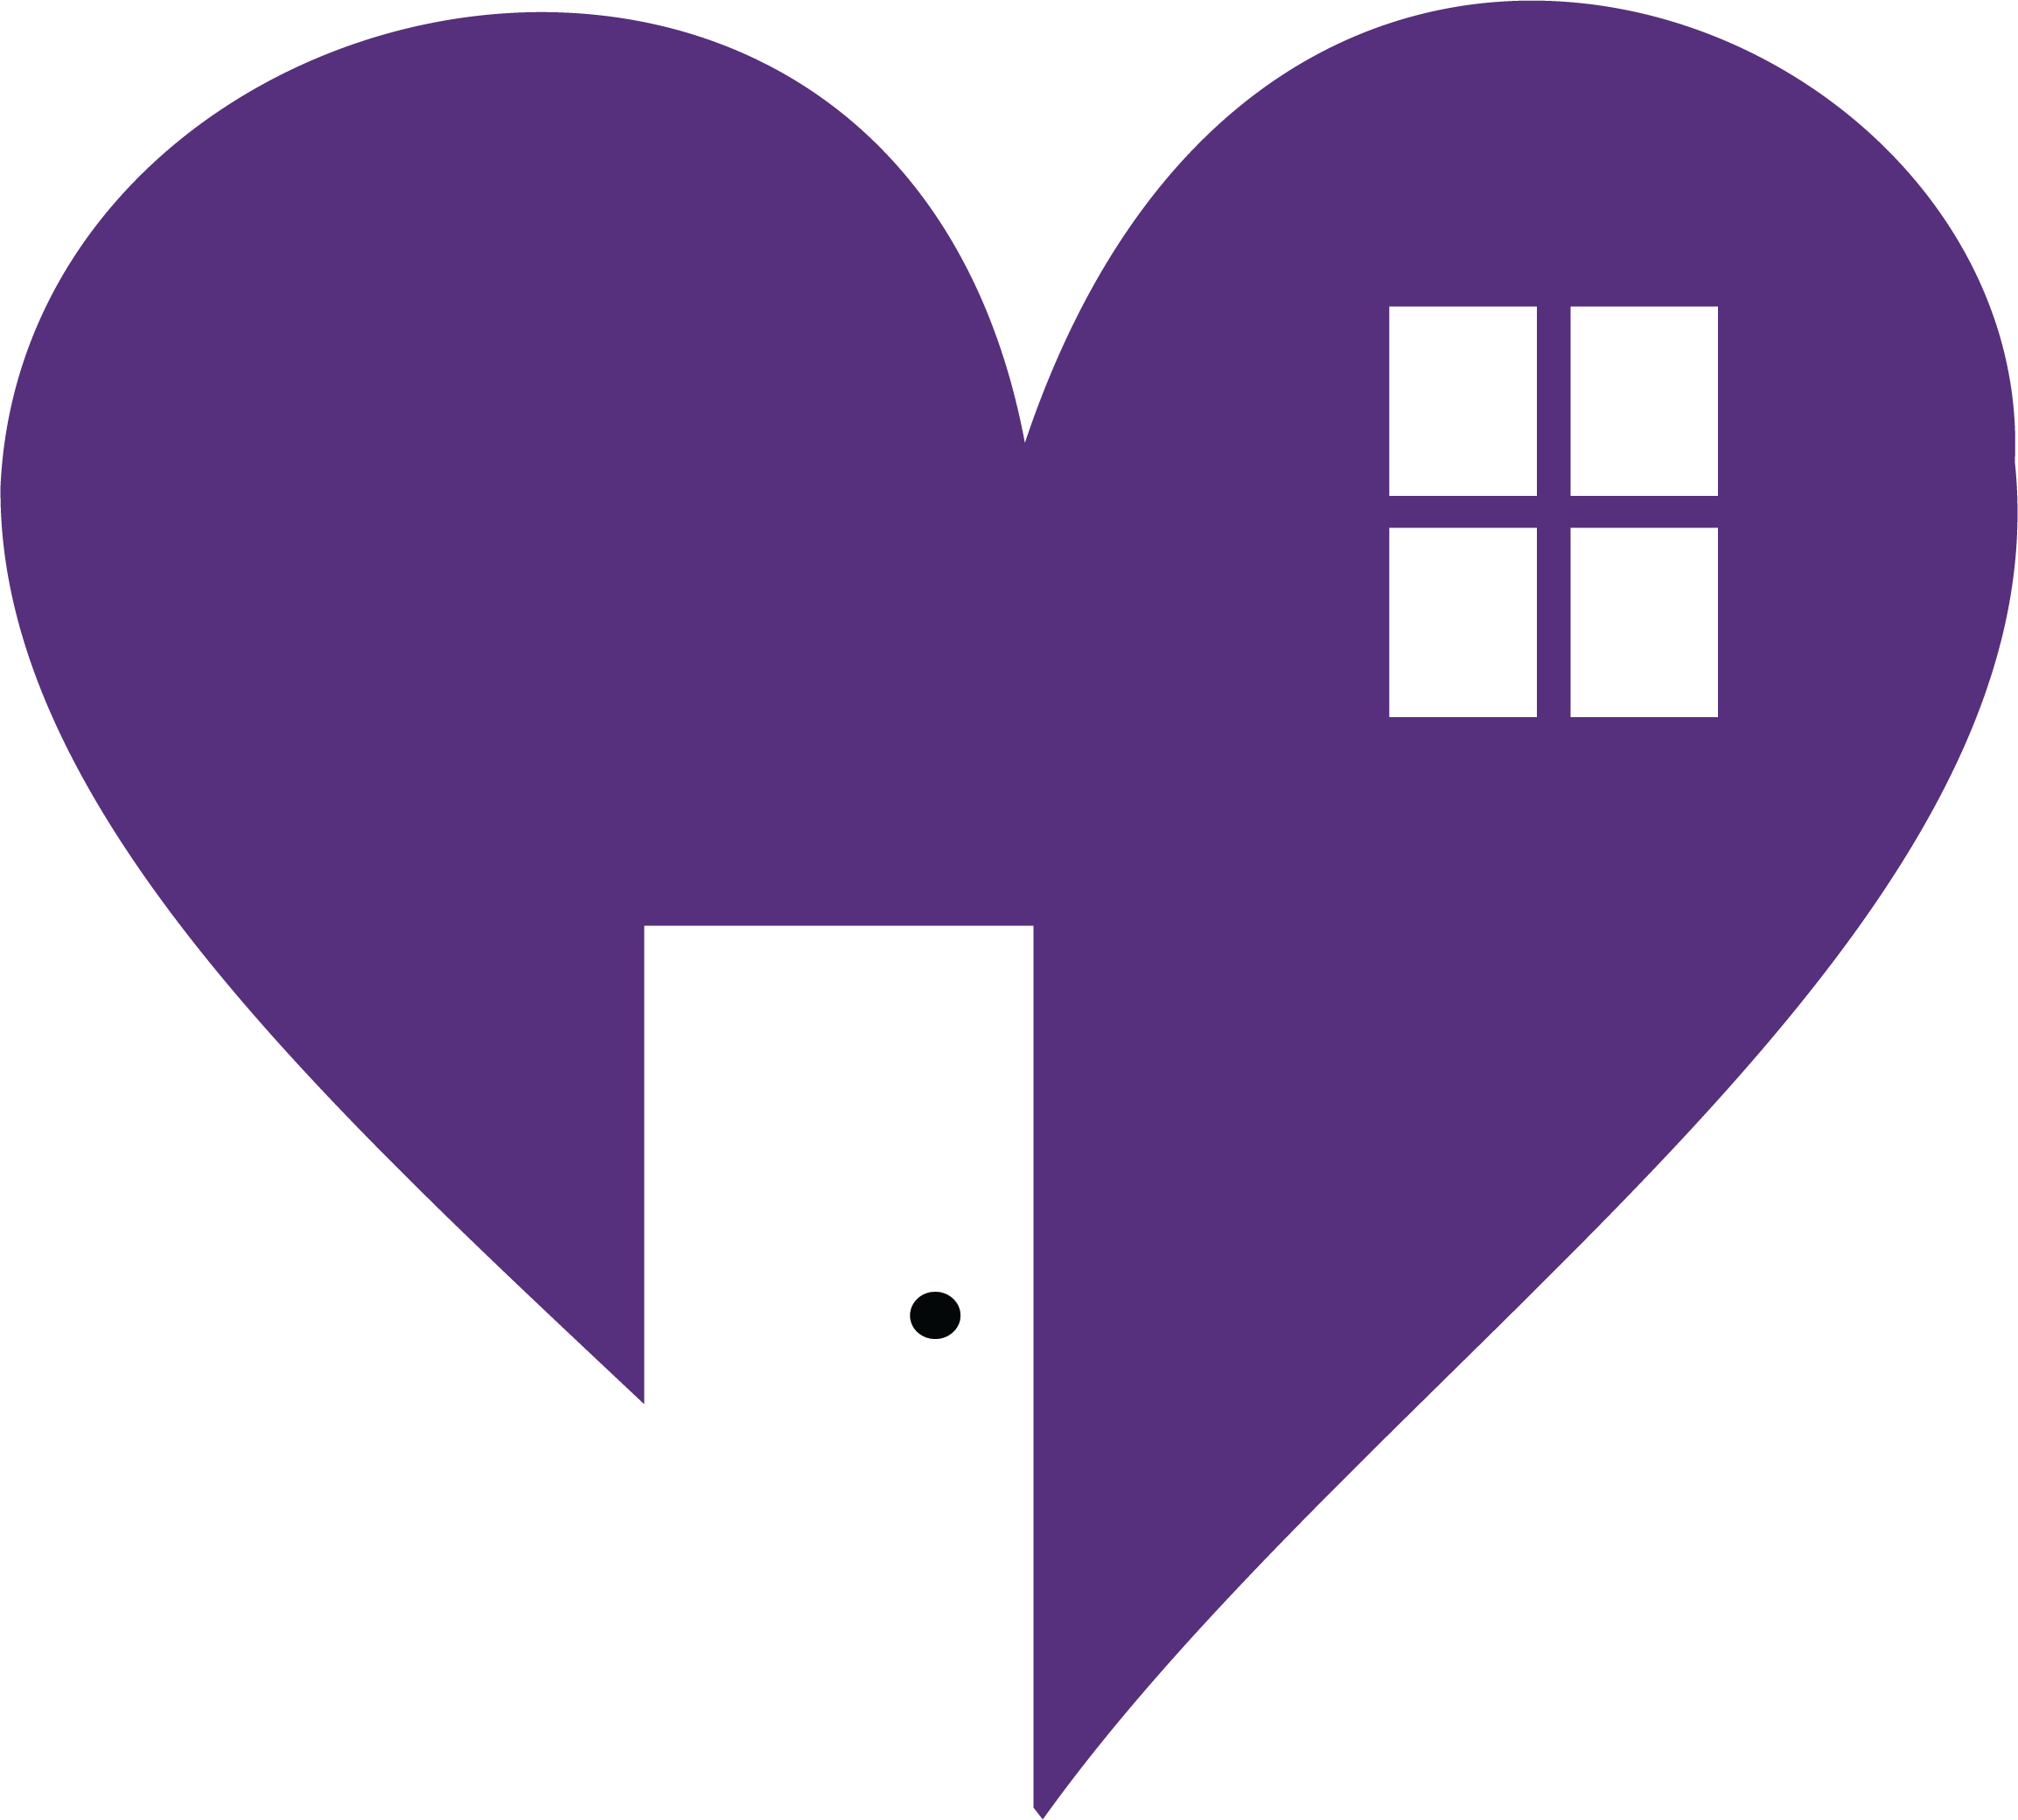 Image of a purple heart in the shape of a home, with a doorway and window cut out of the heart